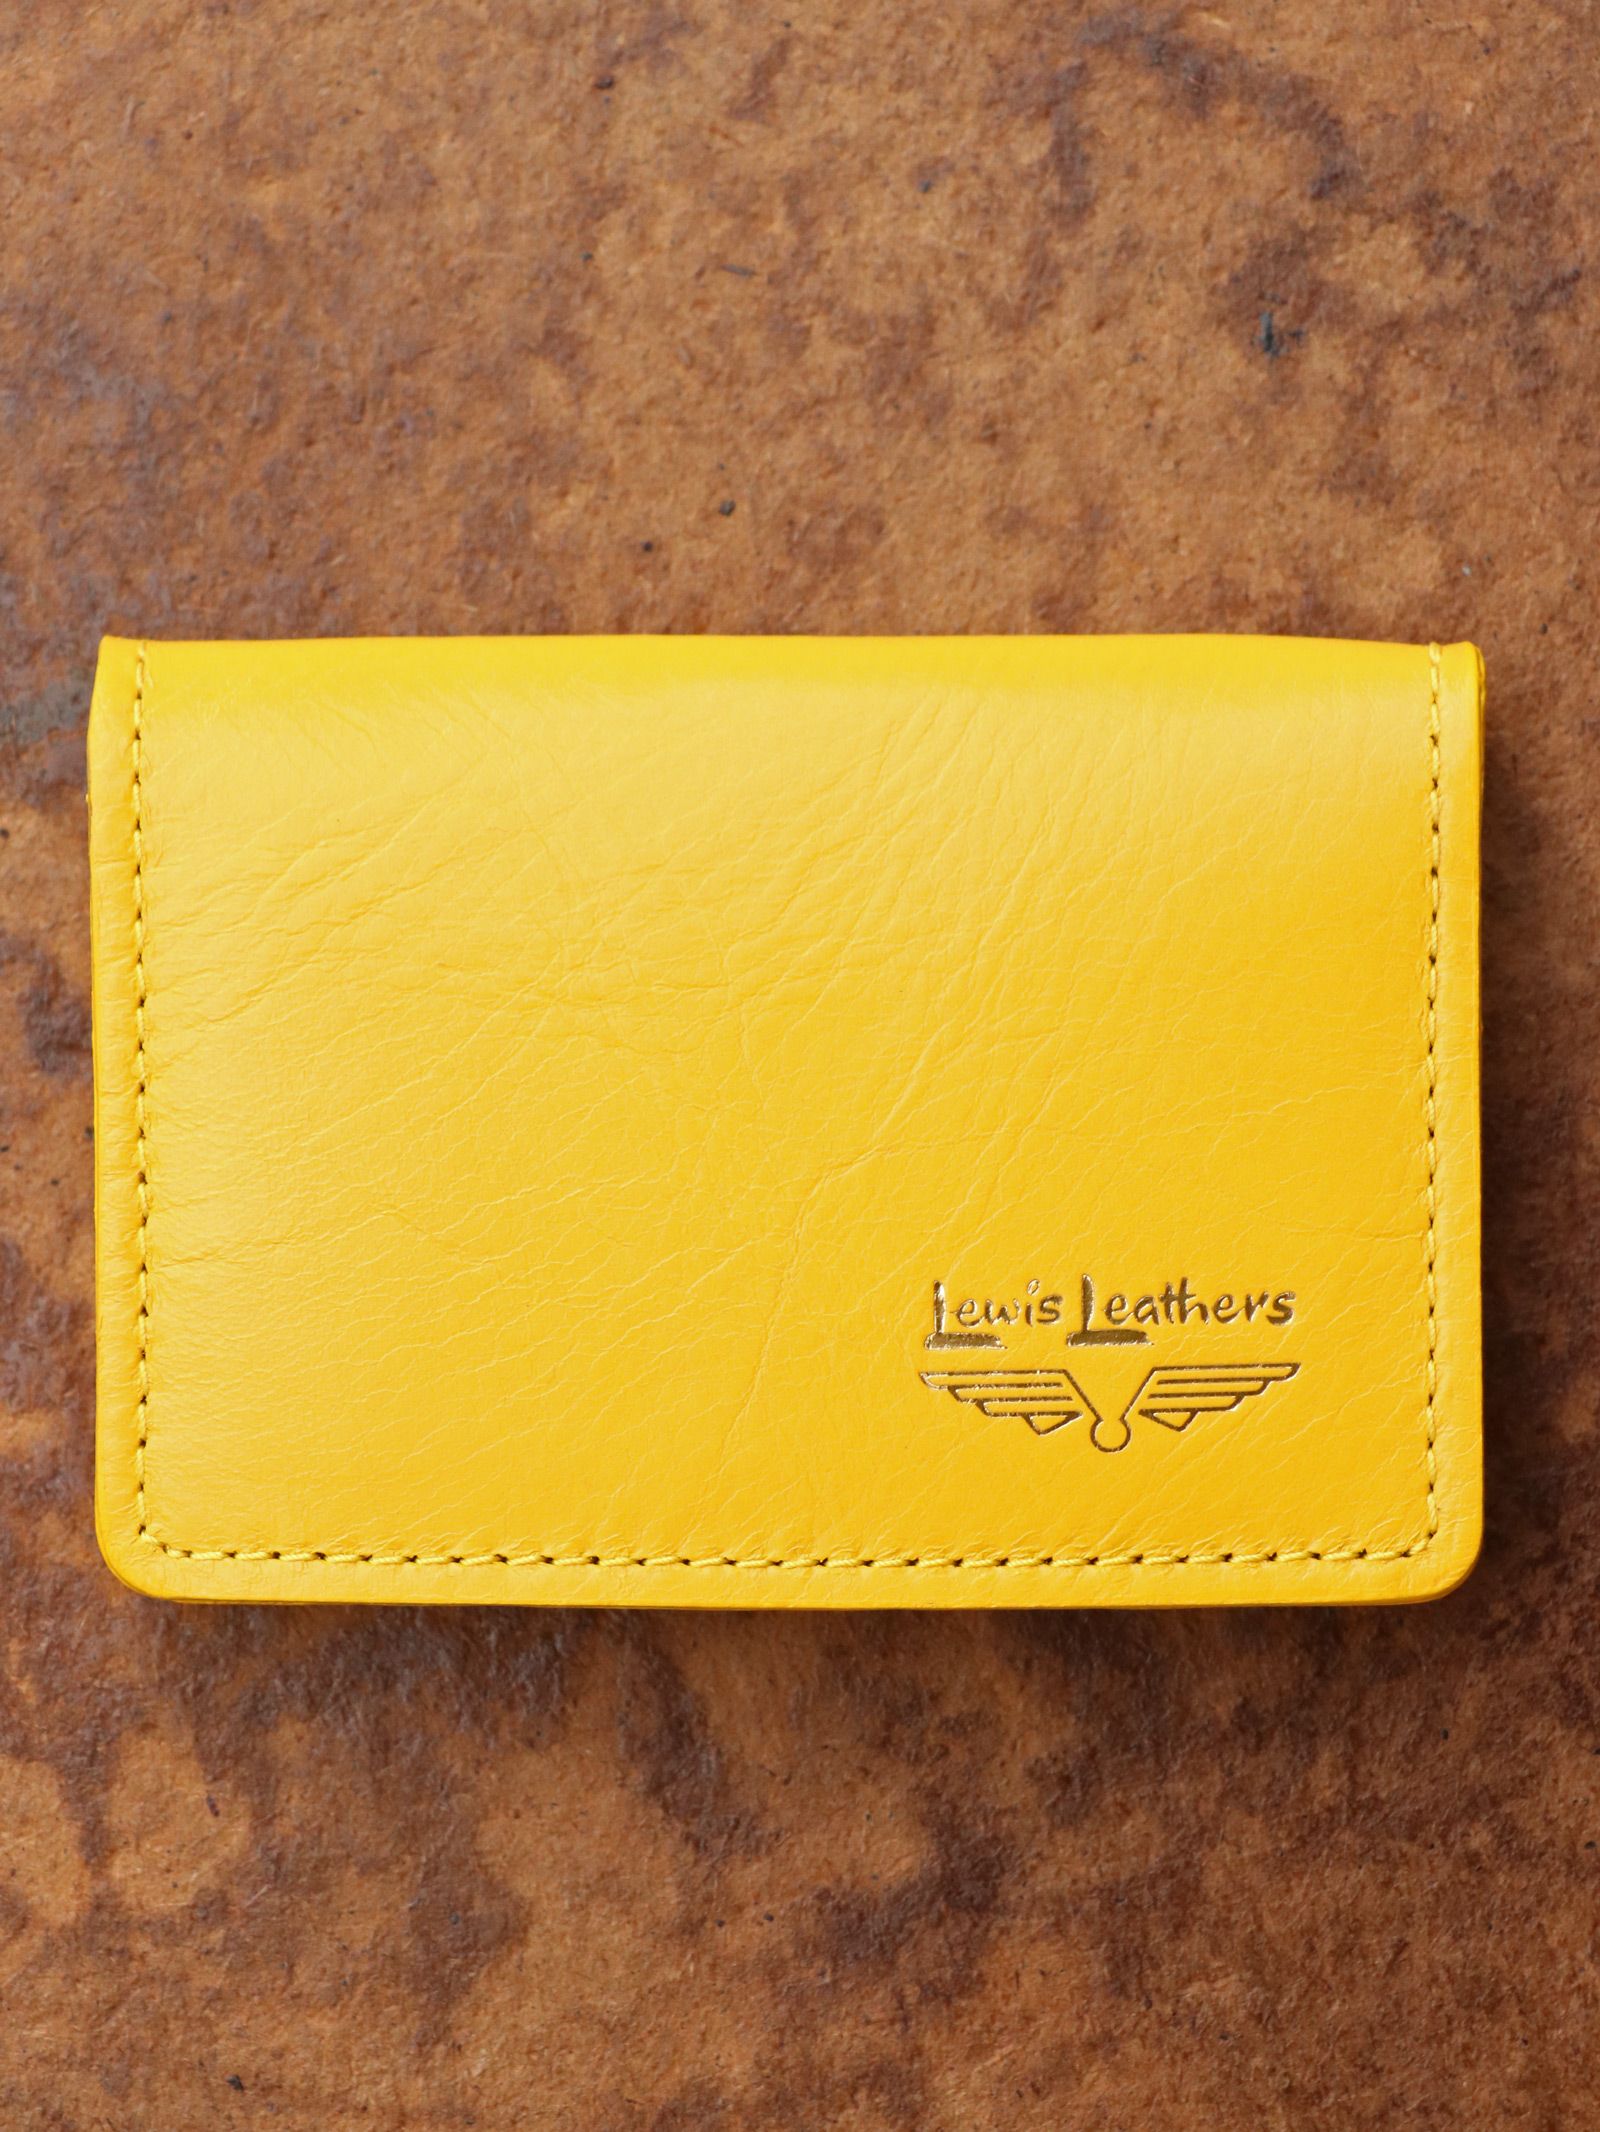 Lewis Leathers - 【即日発送可能】LEWIS LEATHERS CARD CASE 